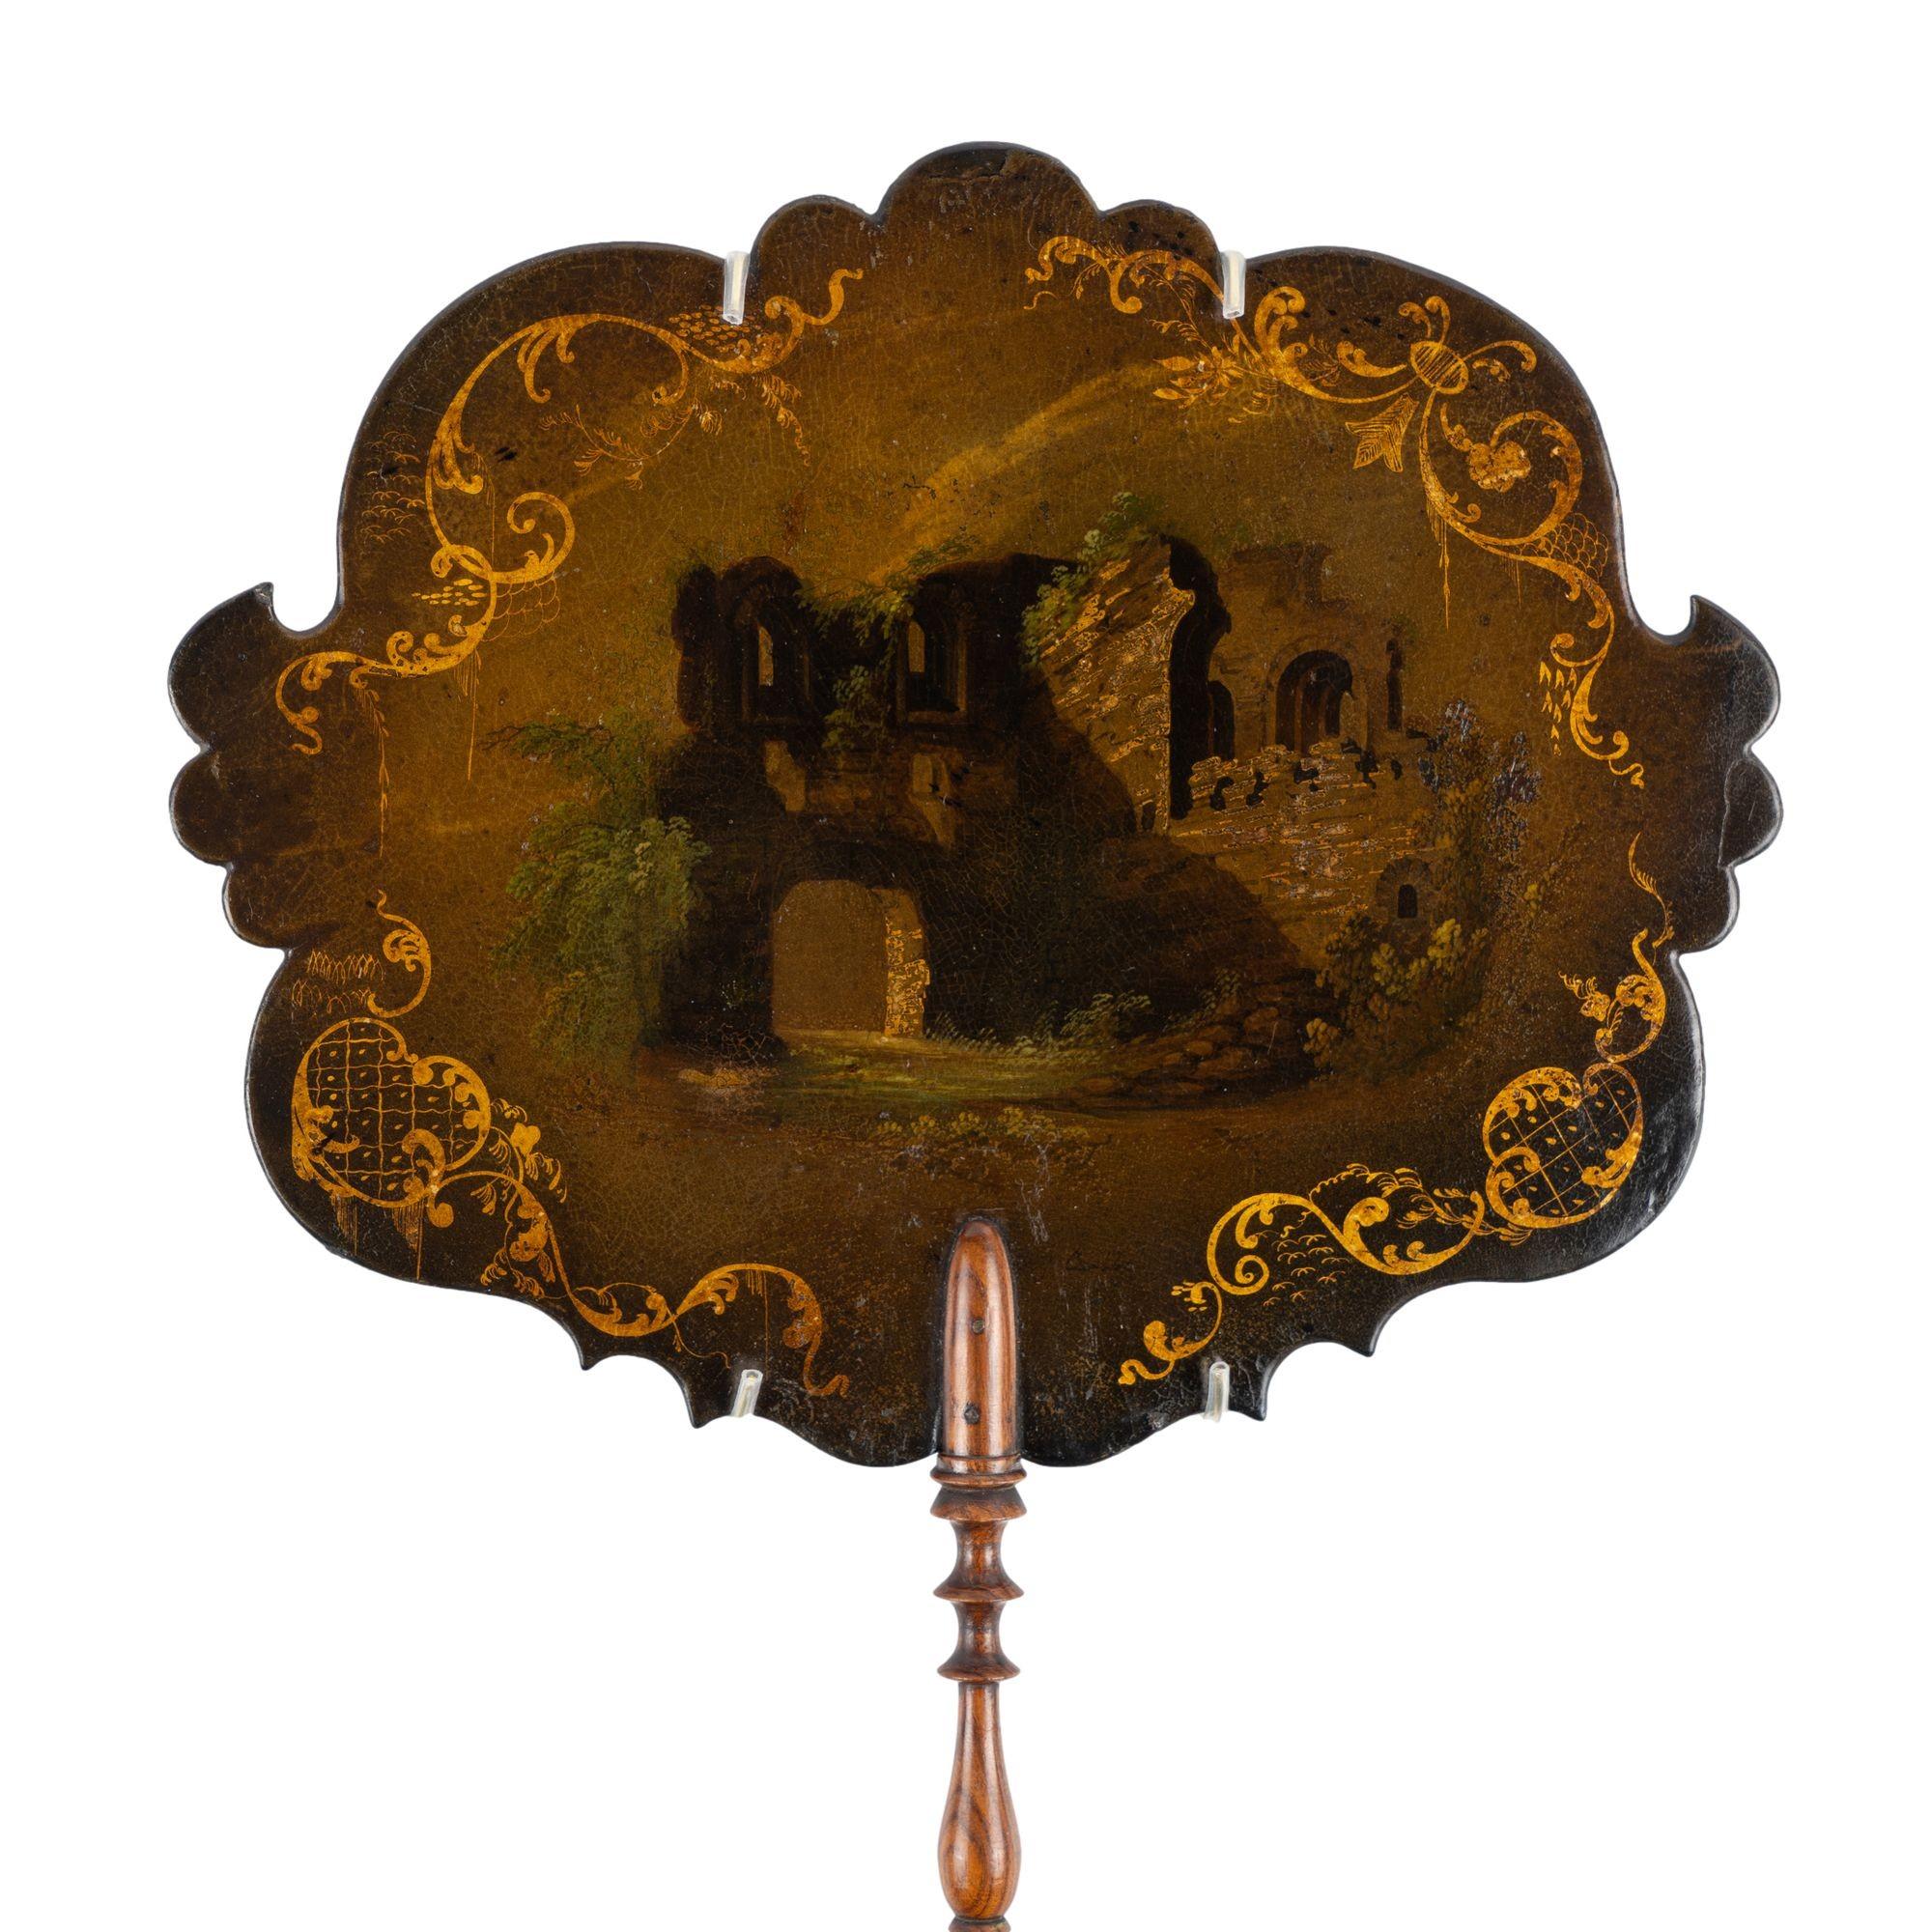 Sculptural papier maché face fan with a beautifully turned rosewood handle. These screens were used by women to shield their face from the heat as they sat close to the fire in colder months. The fan is decorated with a scene of English Gothic ruins